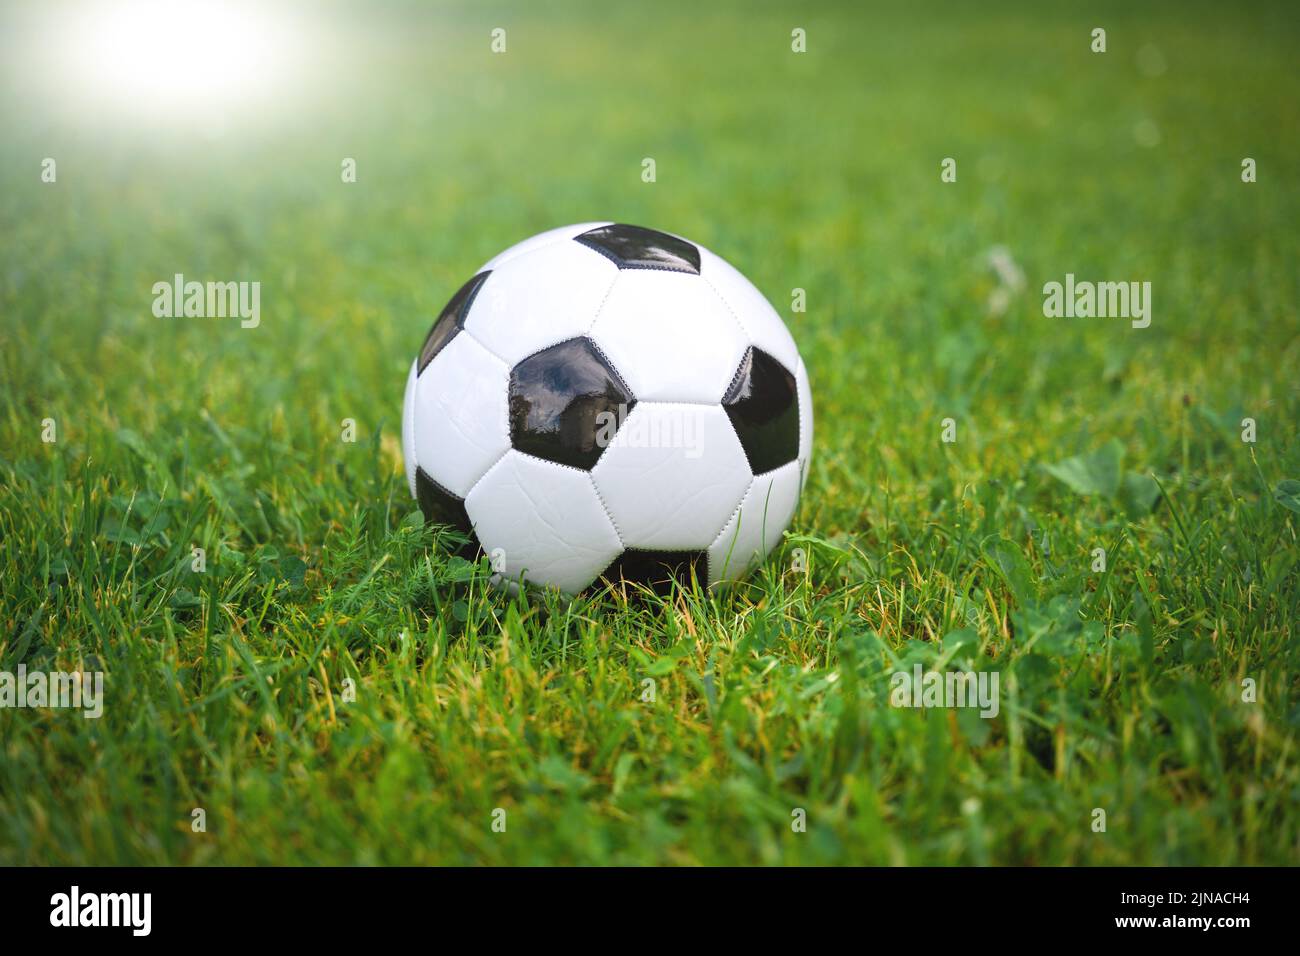 Soccer On The Soccer Field. Green Playing Field Lawn With A Ball, Symbol Image Soccer World Cup World Cup Stock Photo